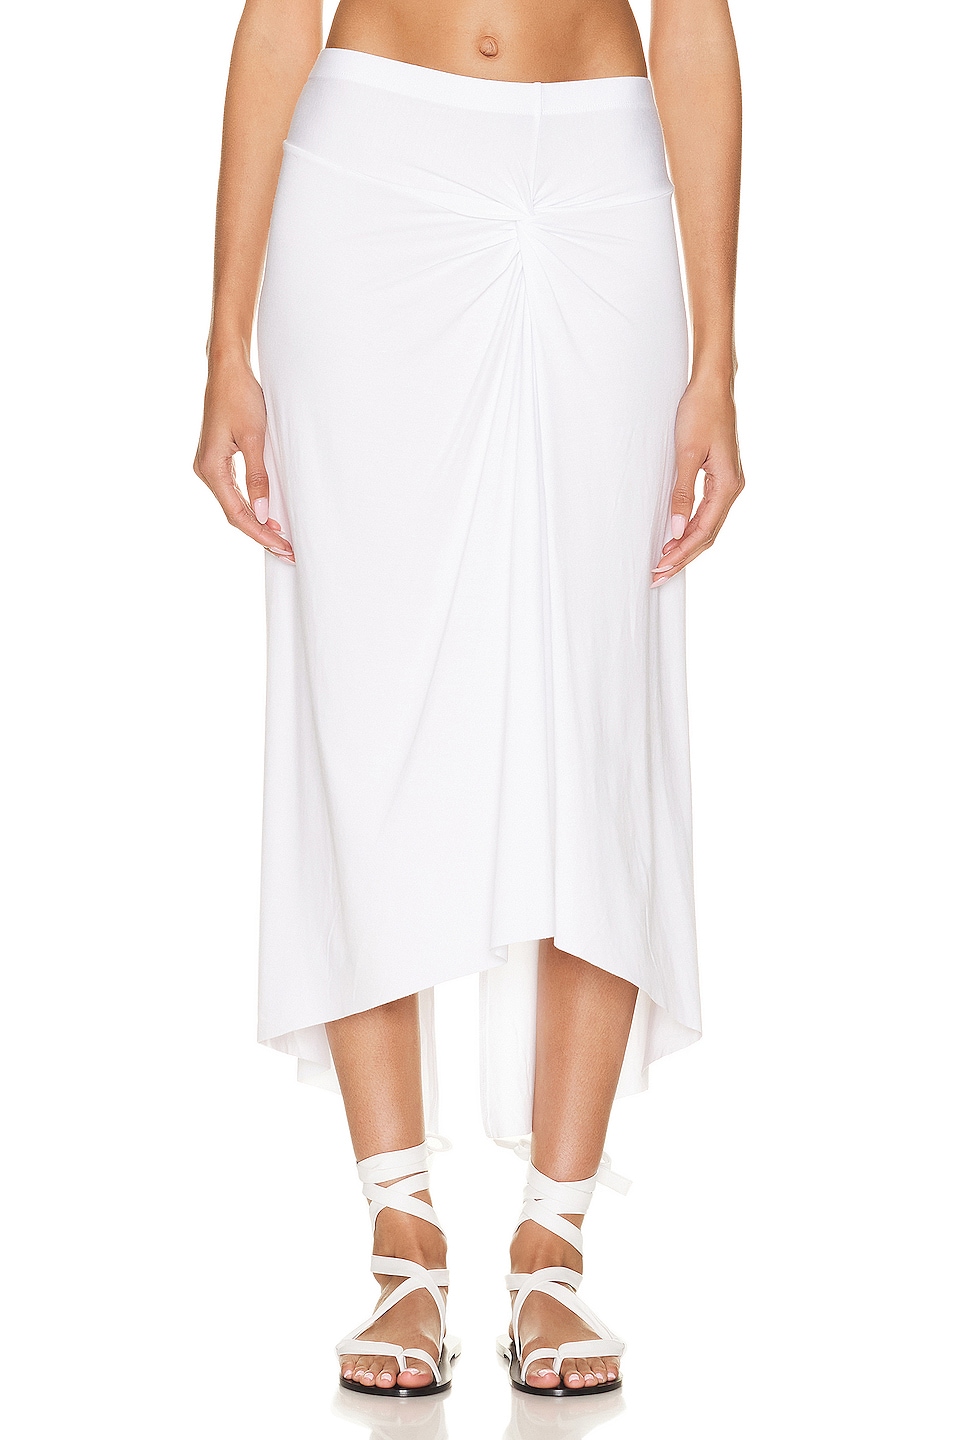 Image 1 of Enza Costa Italian Sarong Skirt in White